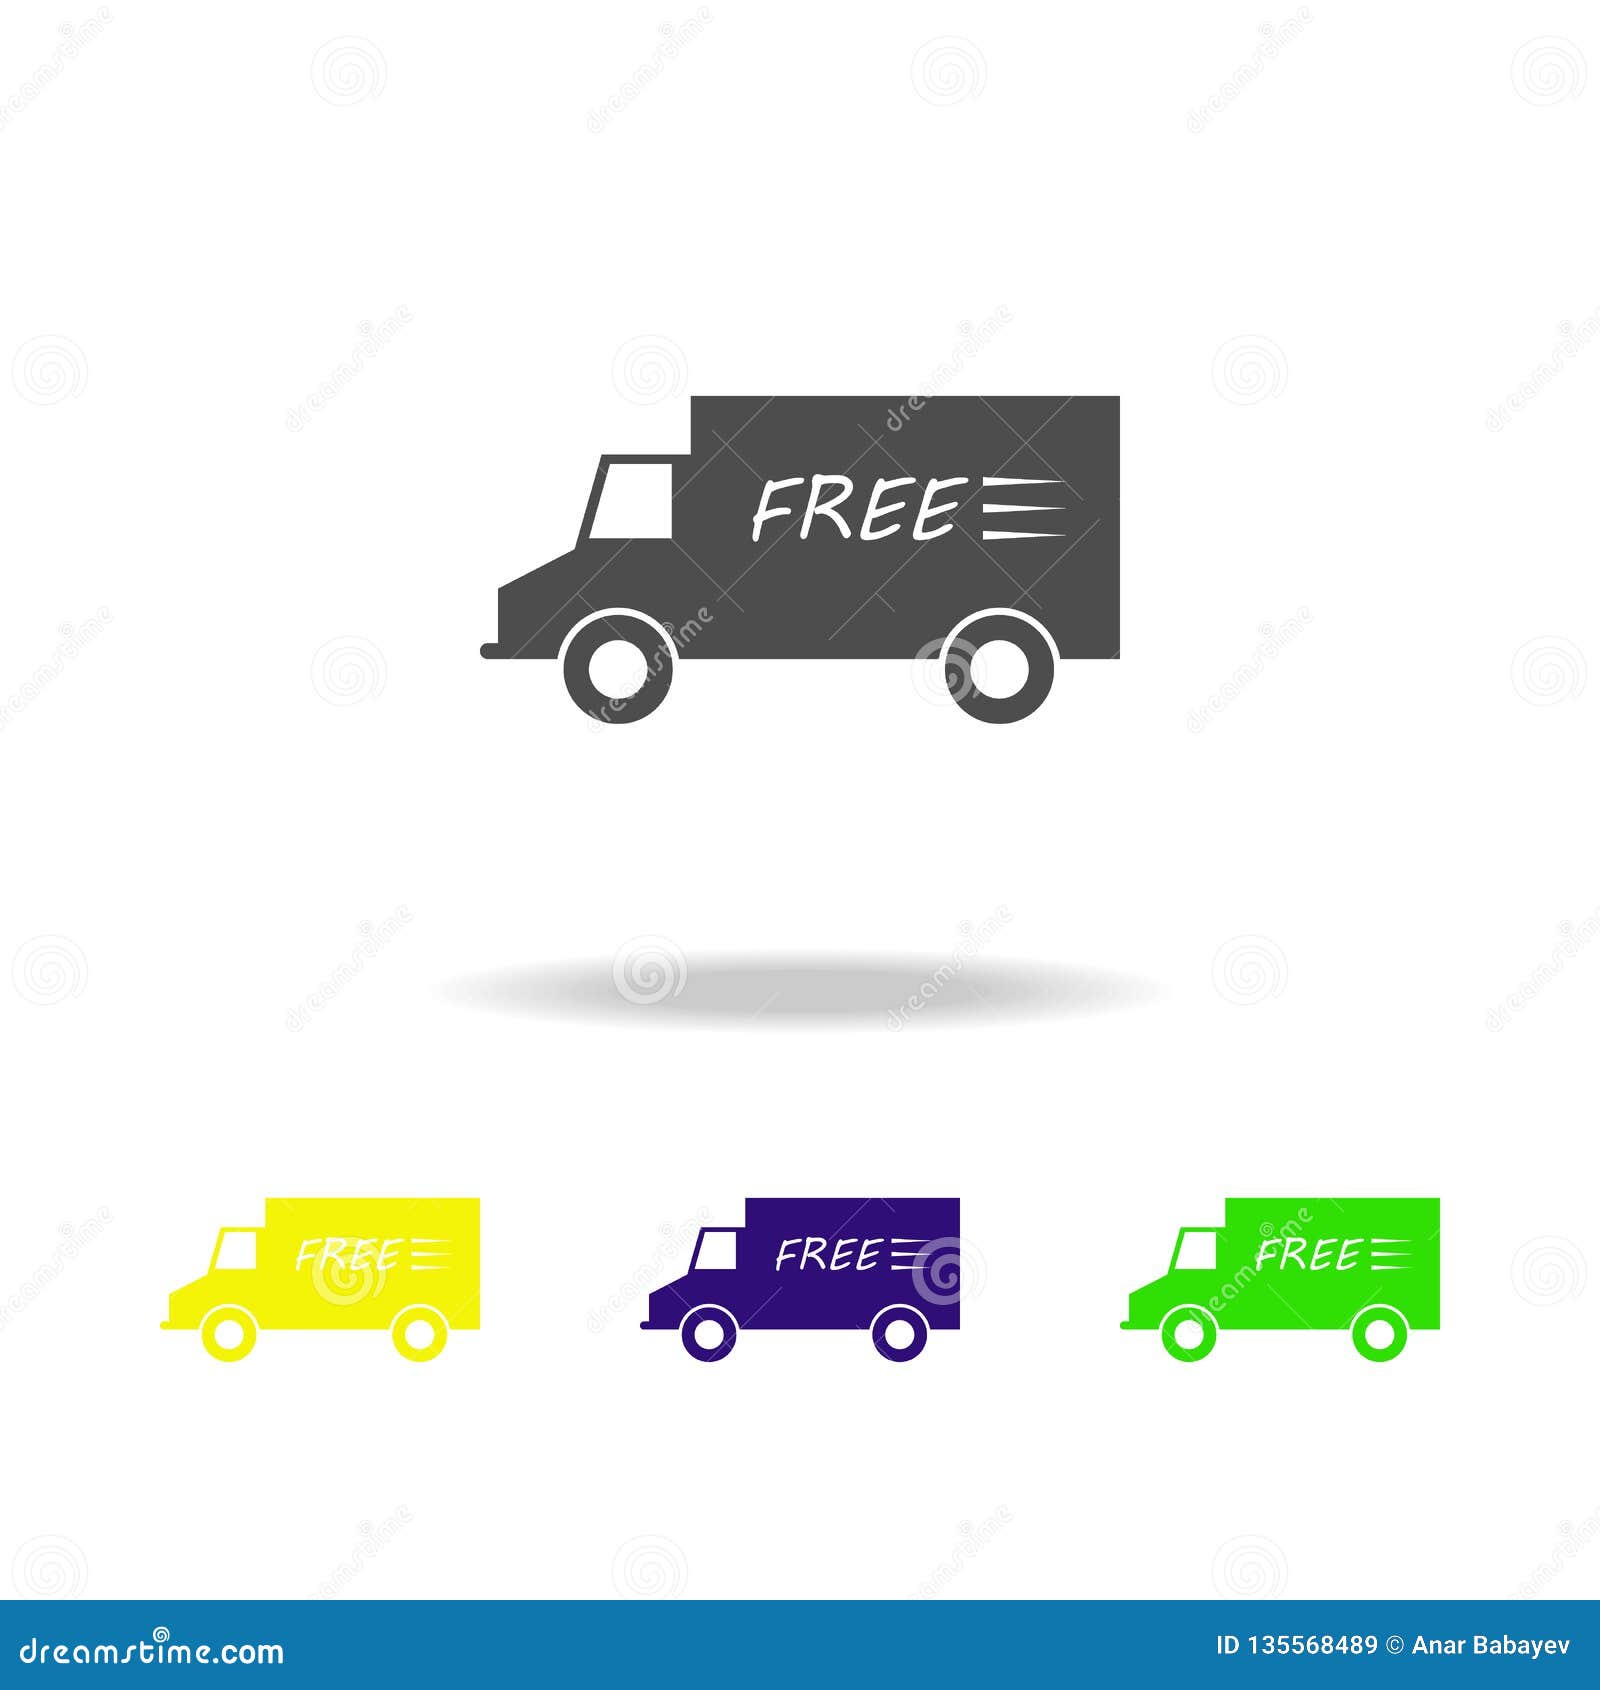 52,200+ Fast Delivery Icon Stock Illustrations, Royalty-Free